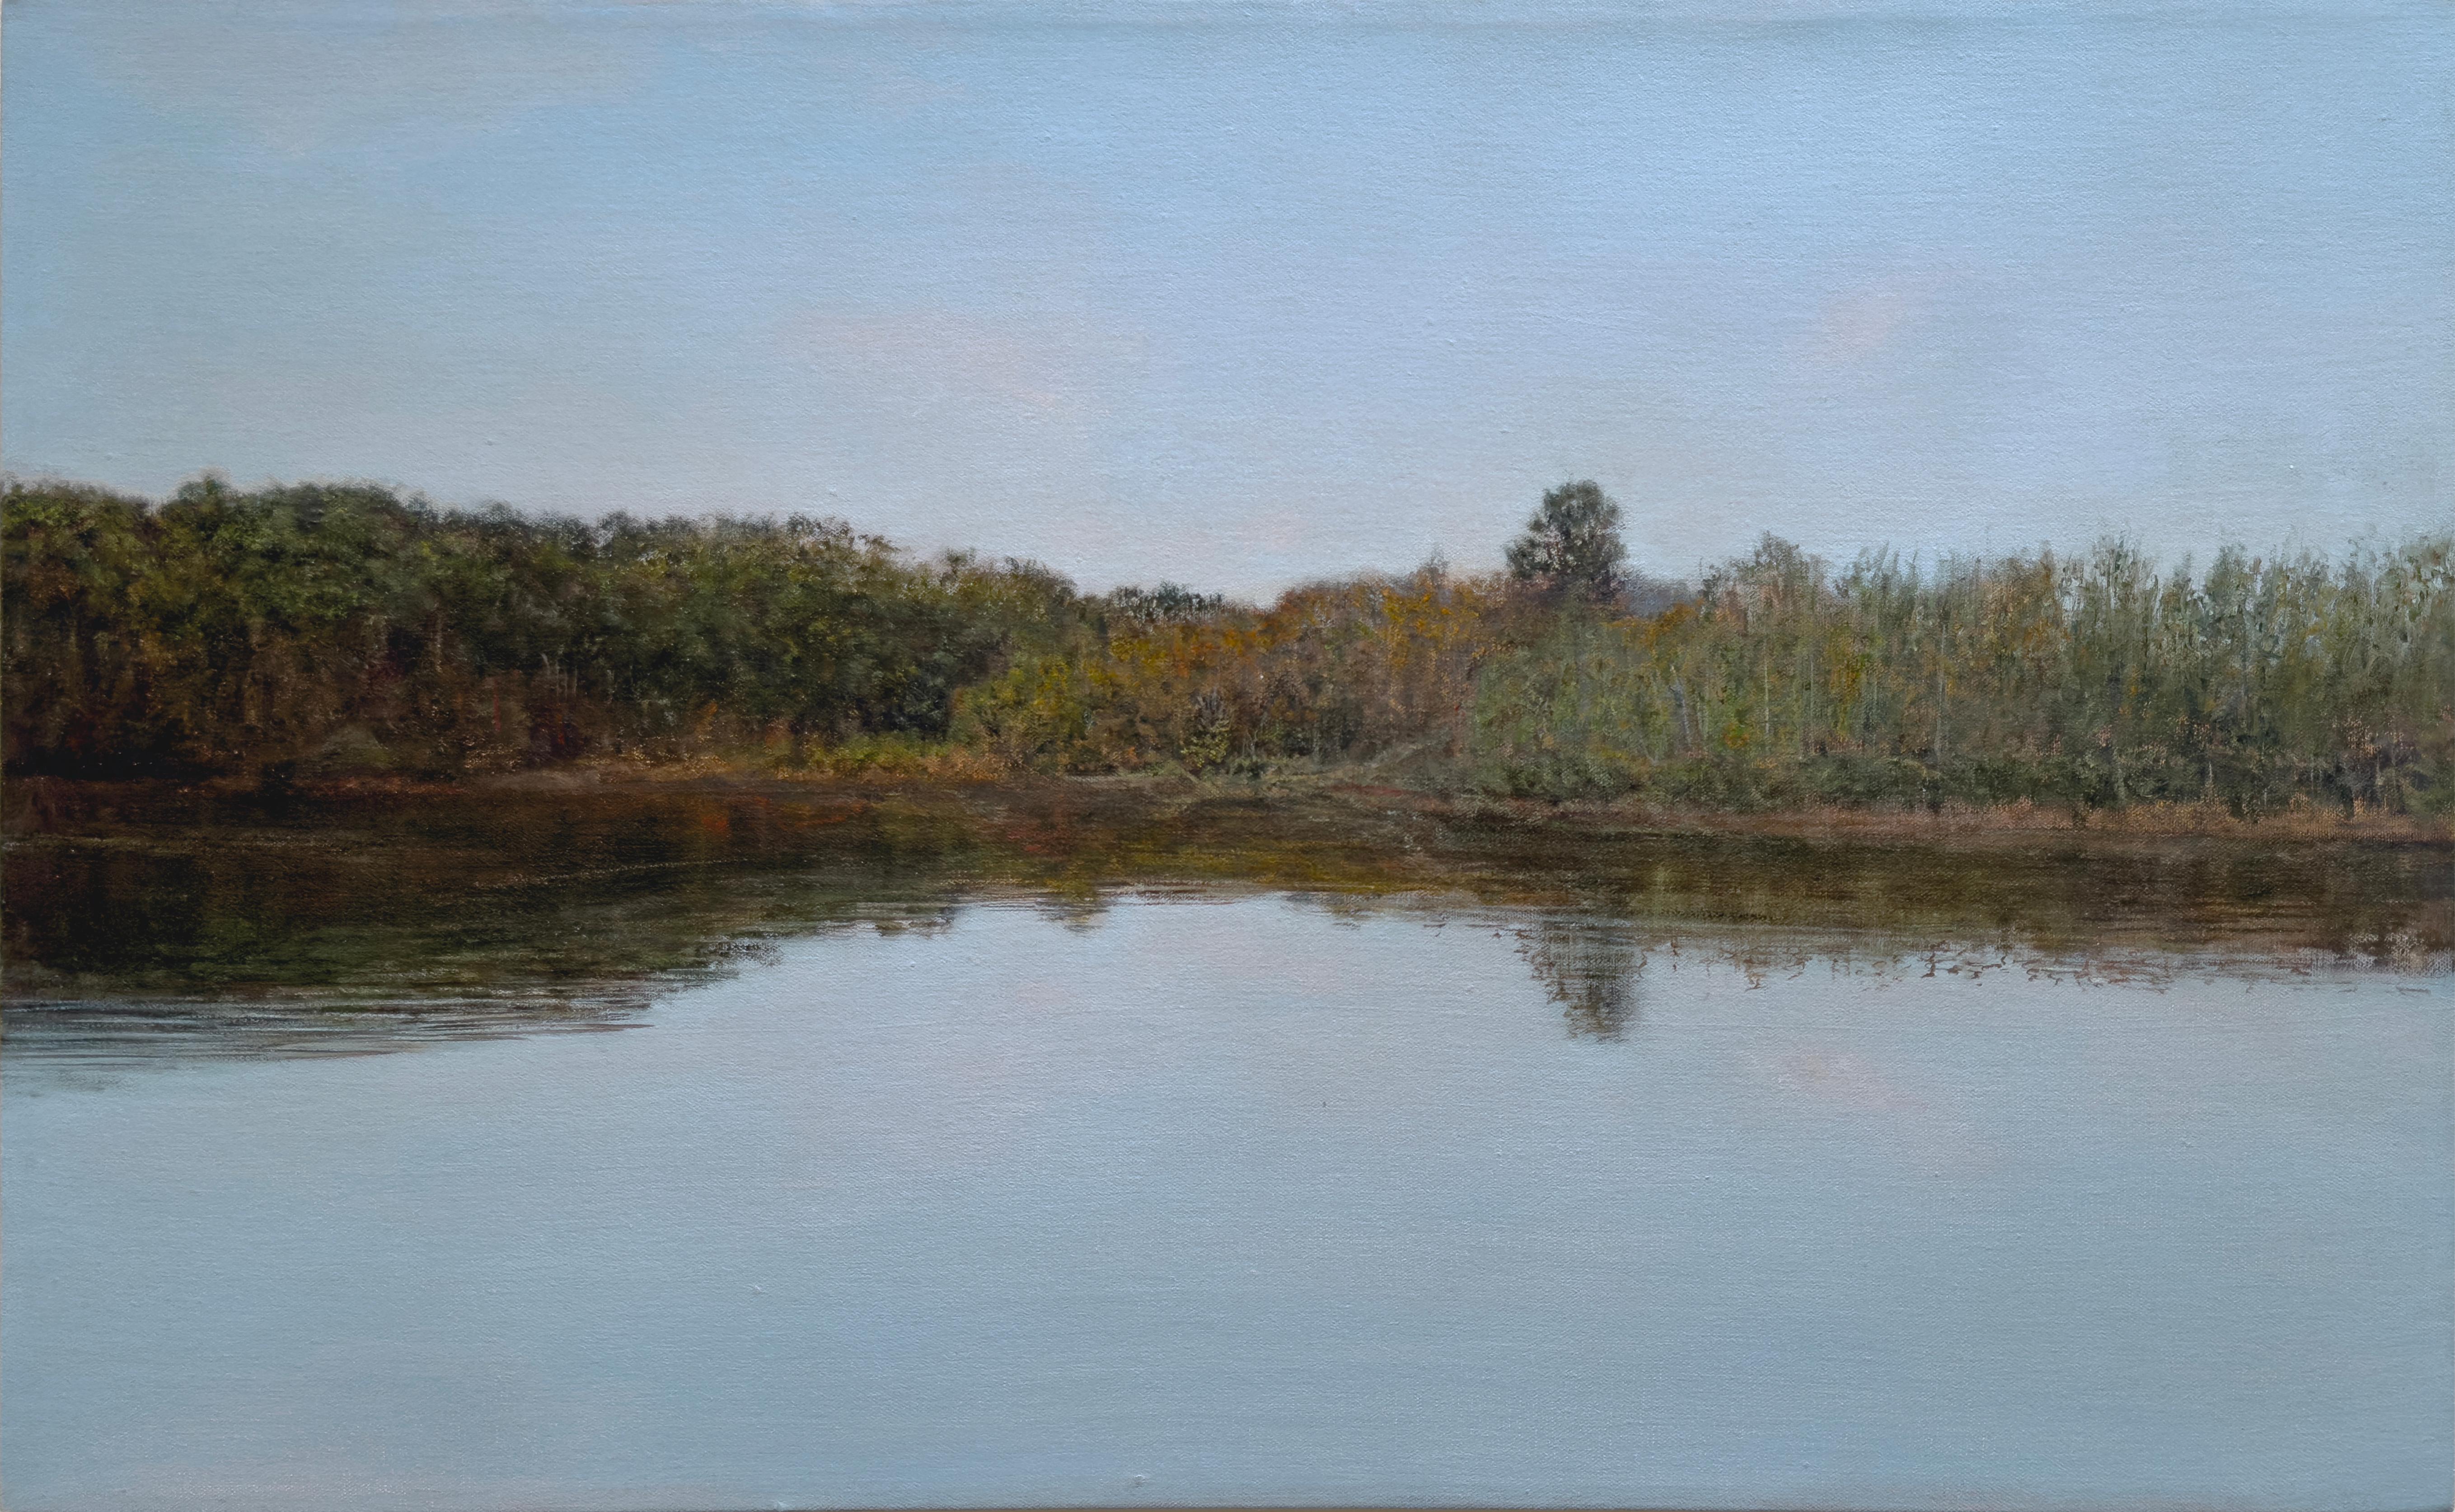 Ben Whitehouse Landscape Painting - OXBOW LAGOON, SAUGATUCK, MICHIGAN - Landscape/ Realism / Waterscape / Peaceful